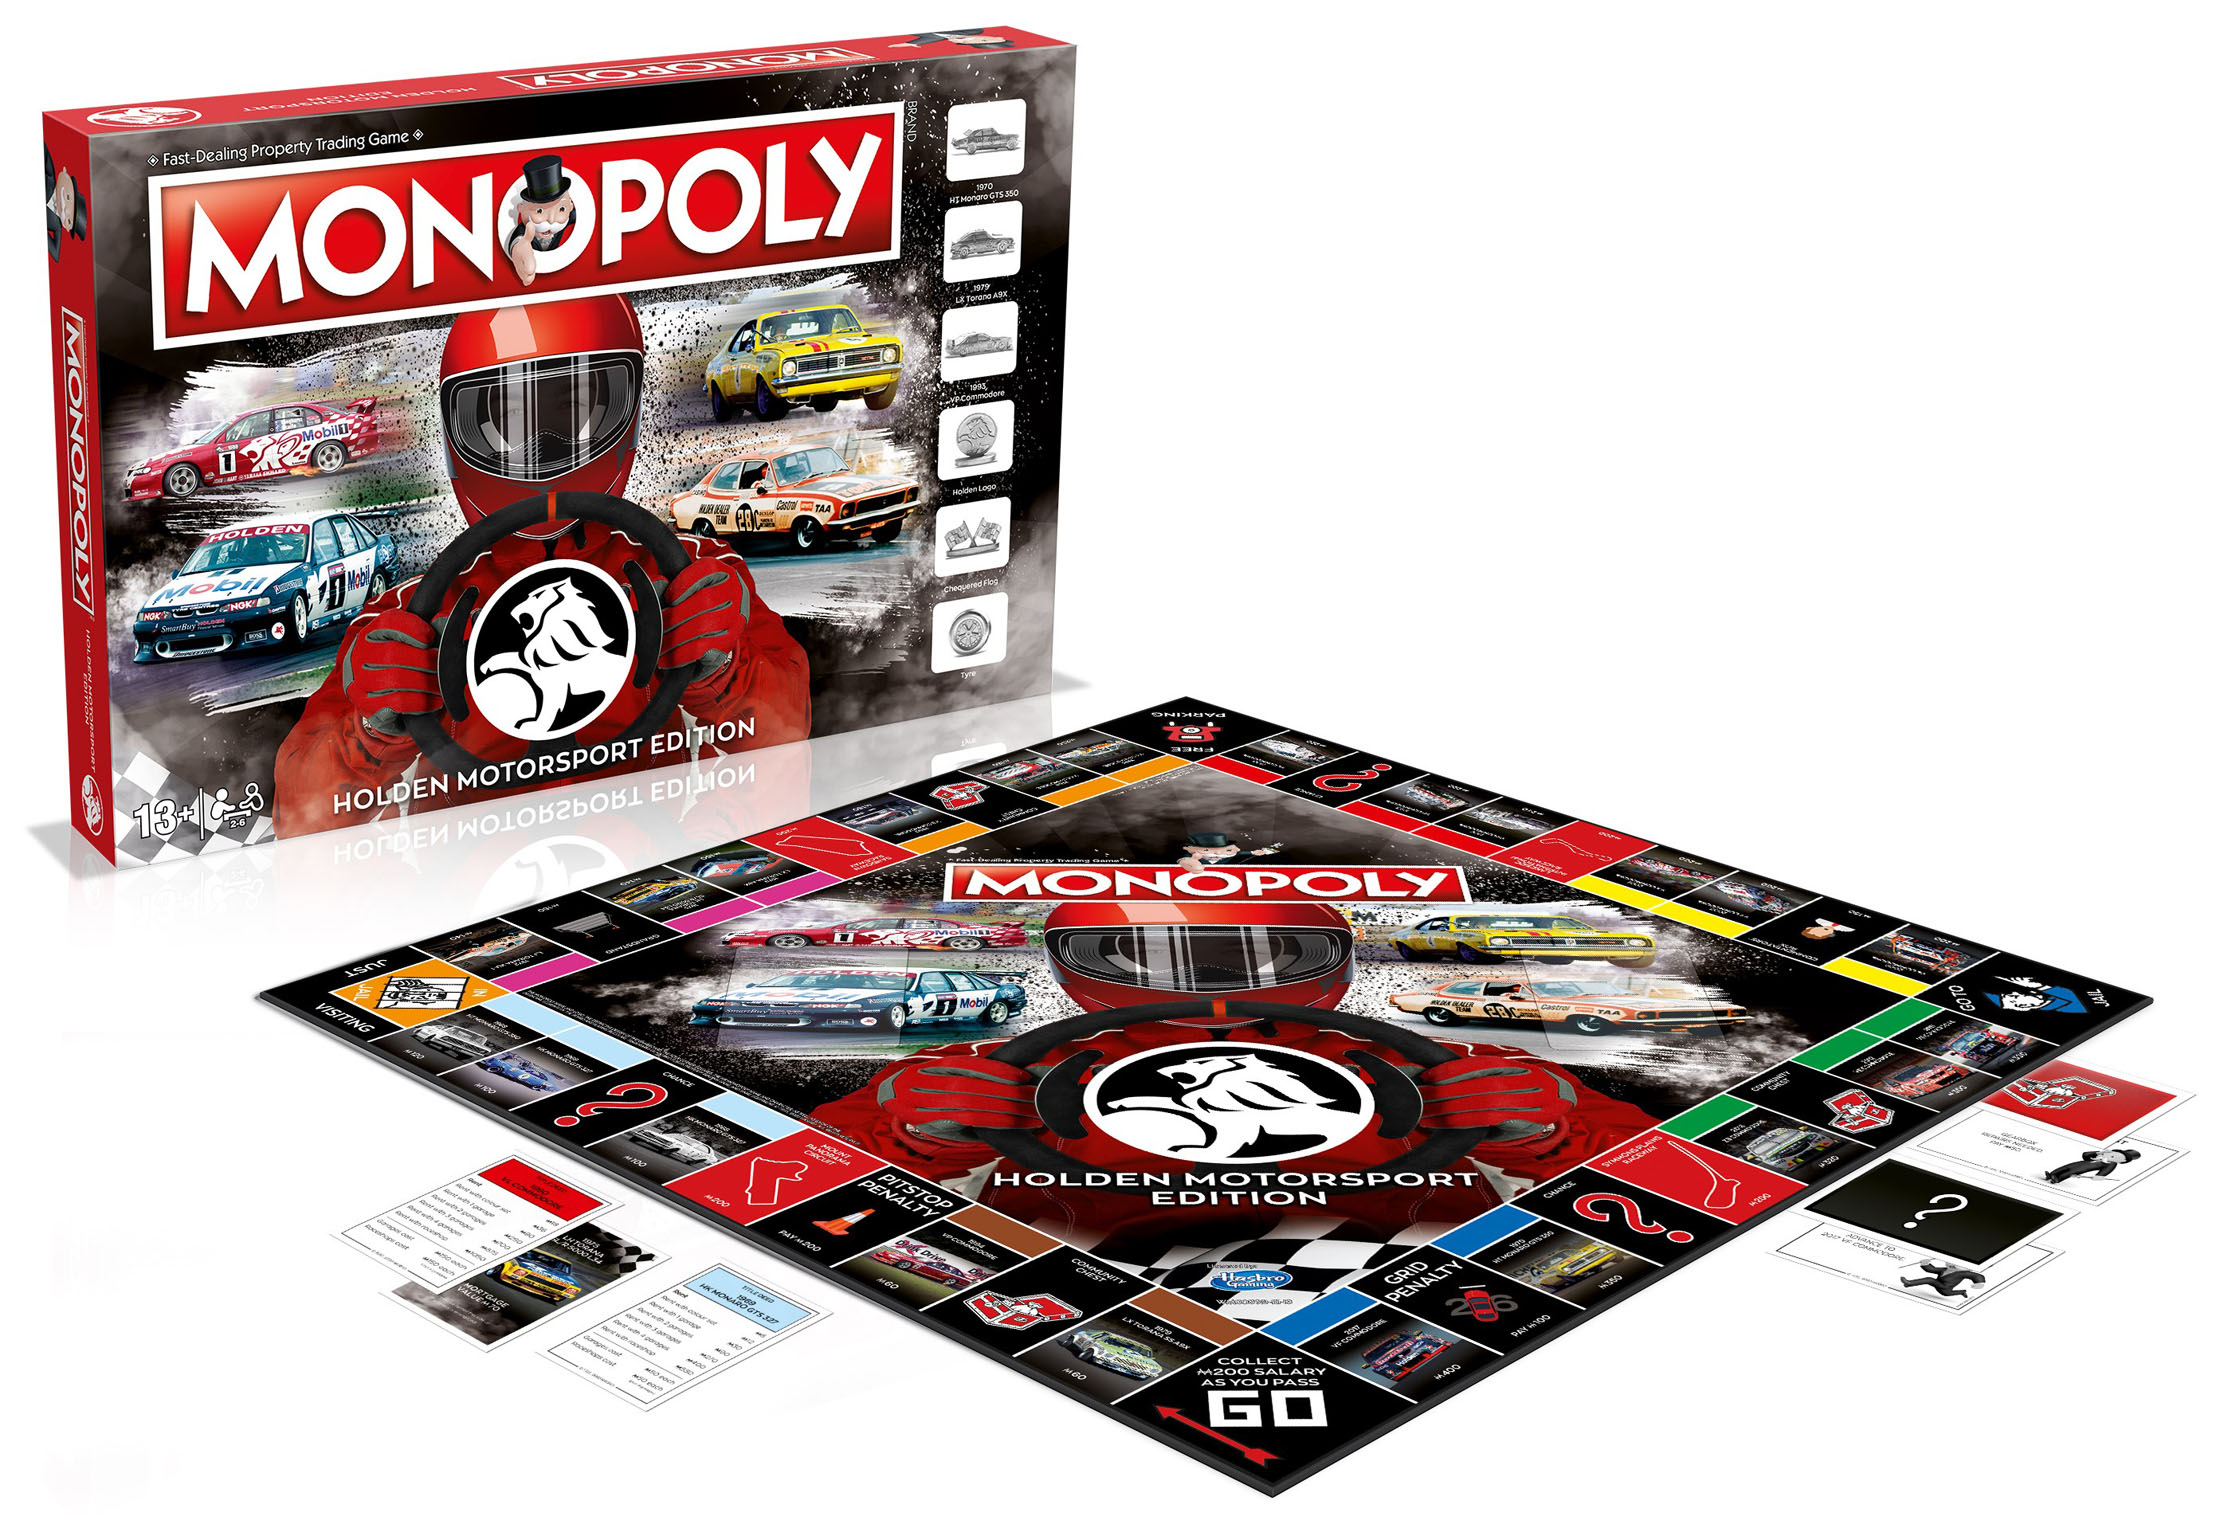 Holden Monopoly Board Game Goes On Sale